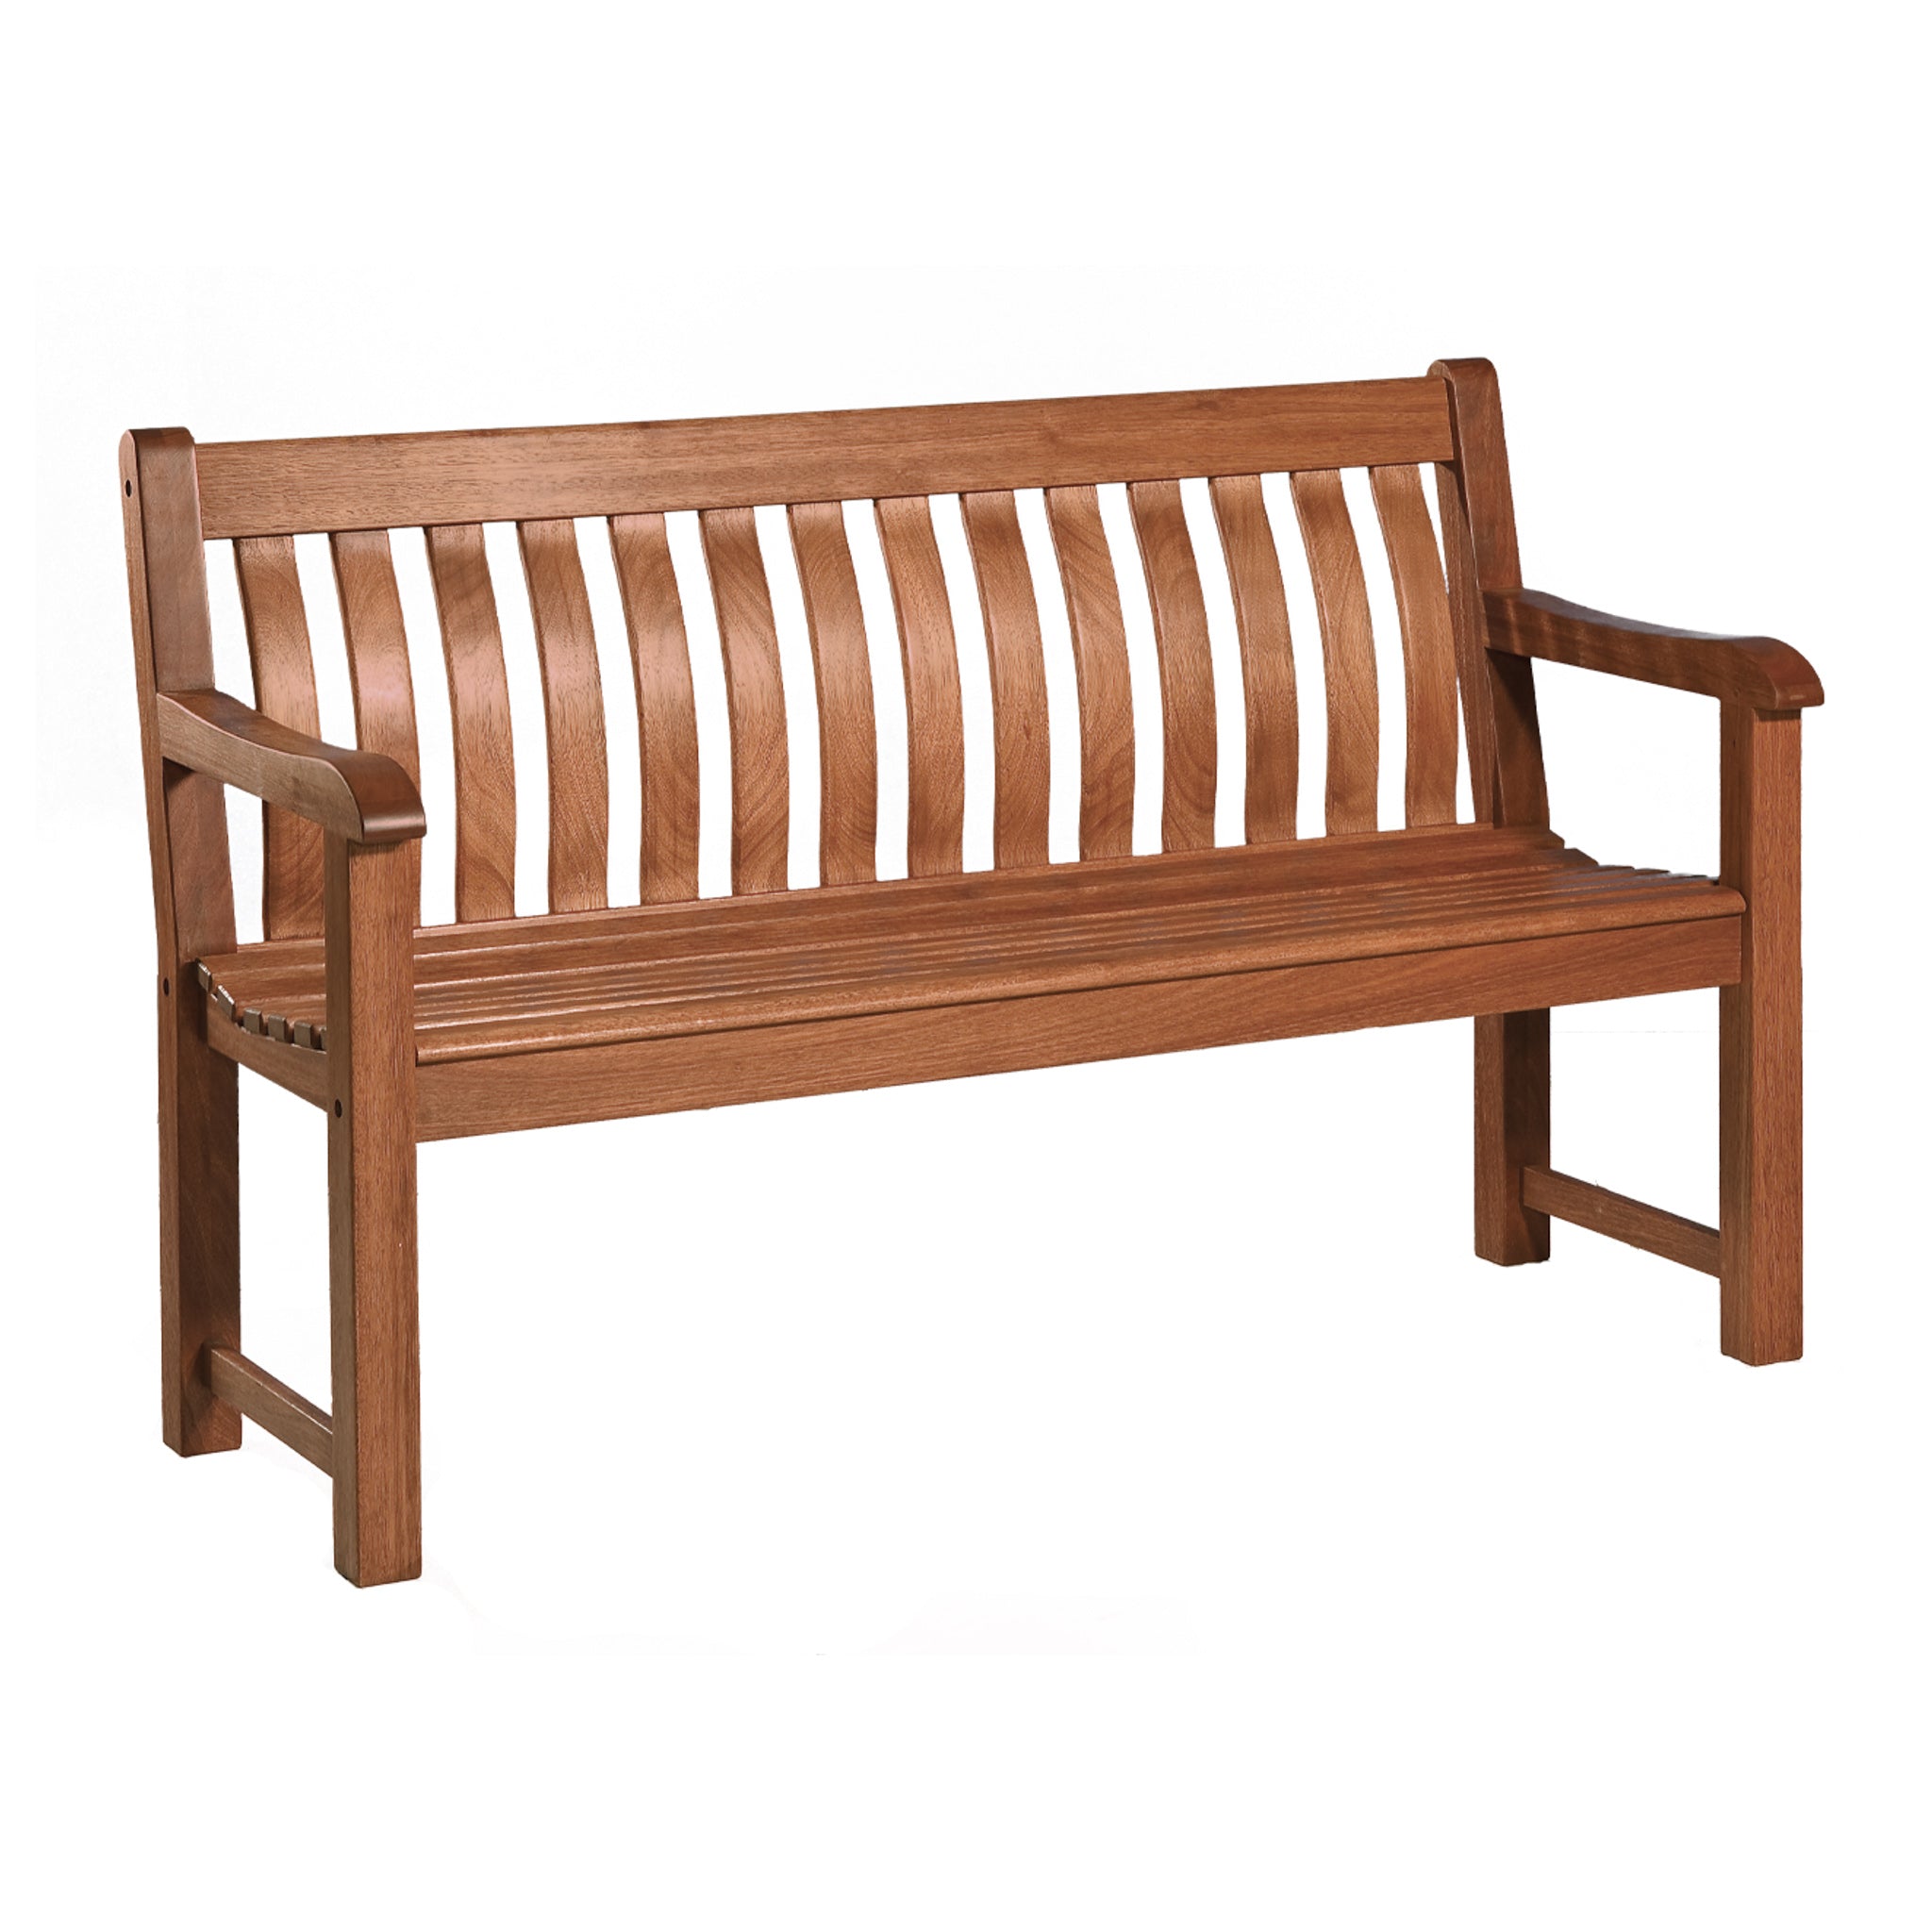 Cornis St George Bench - 5ft